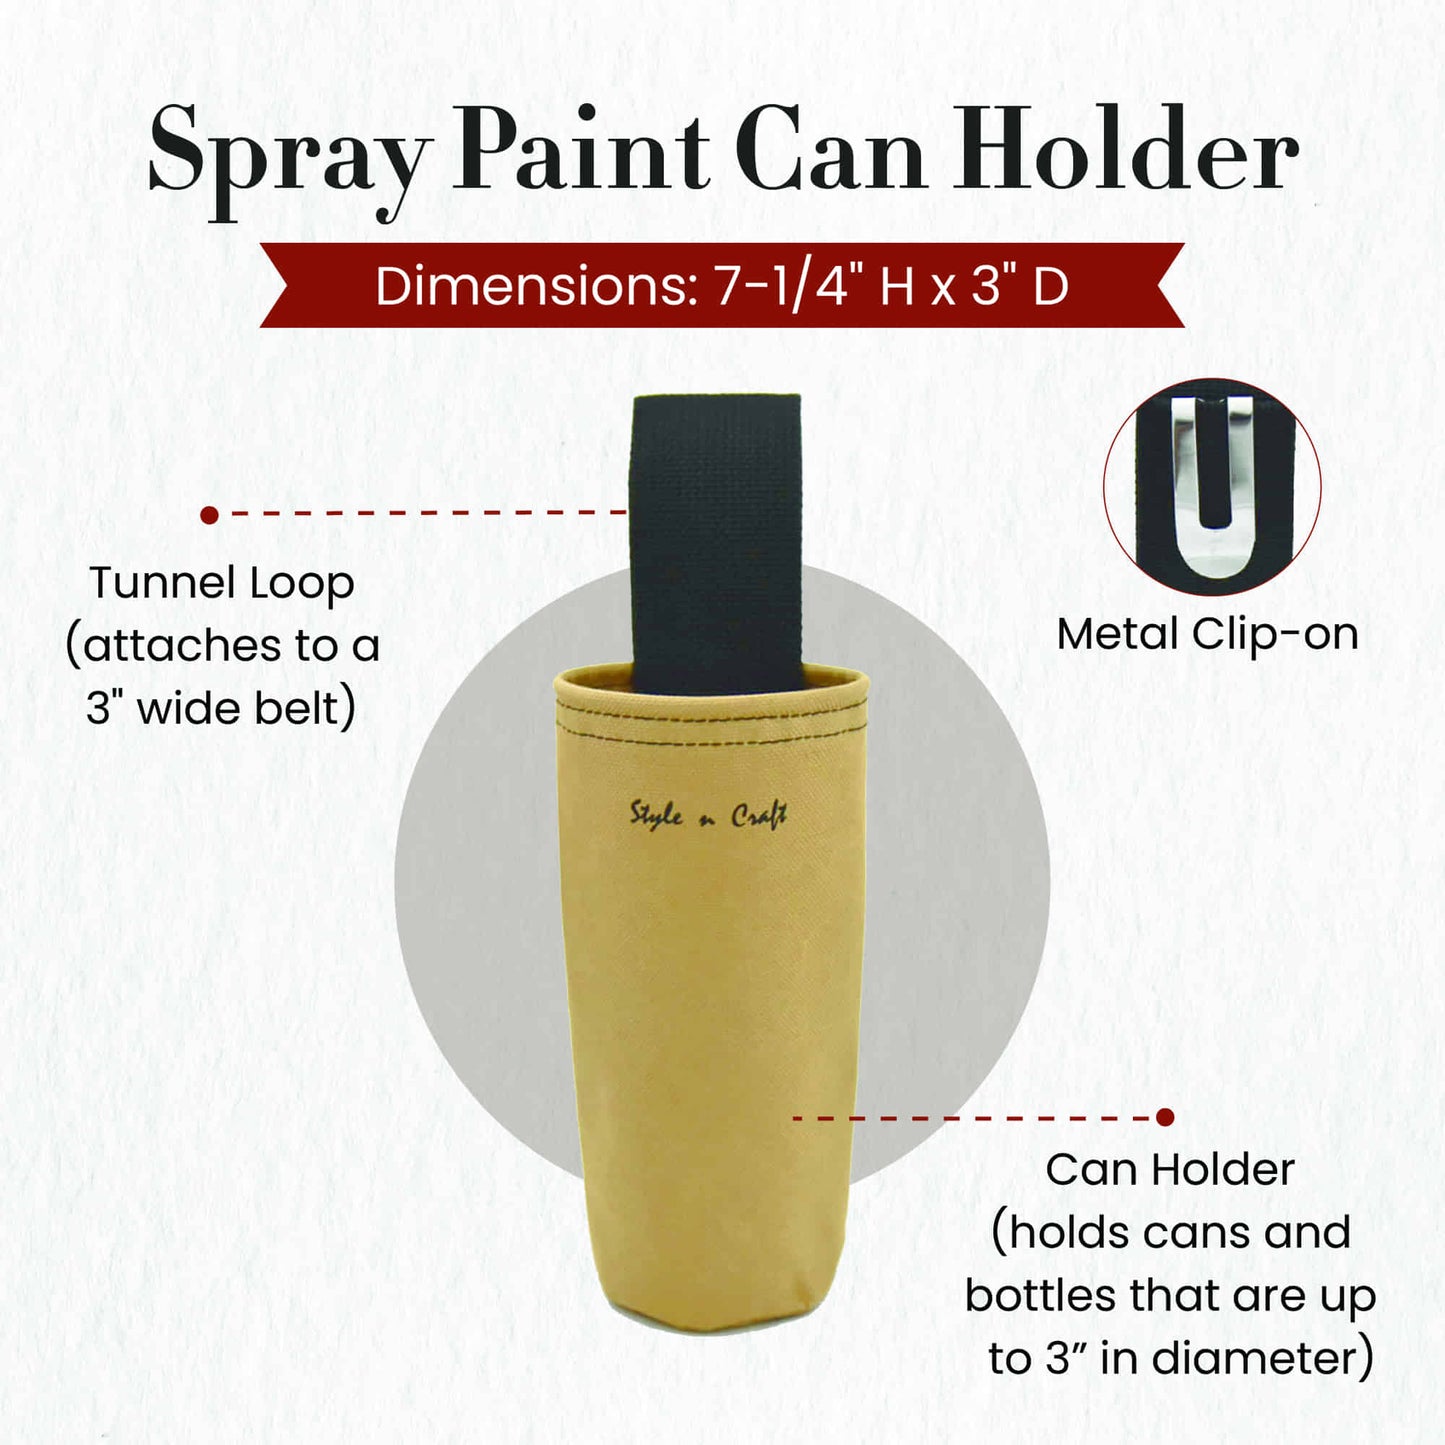 Style n Craft's 76022 - Spray Paint Can Holder in Polyester - front view showing the details